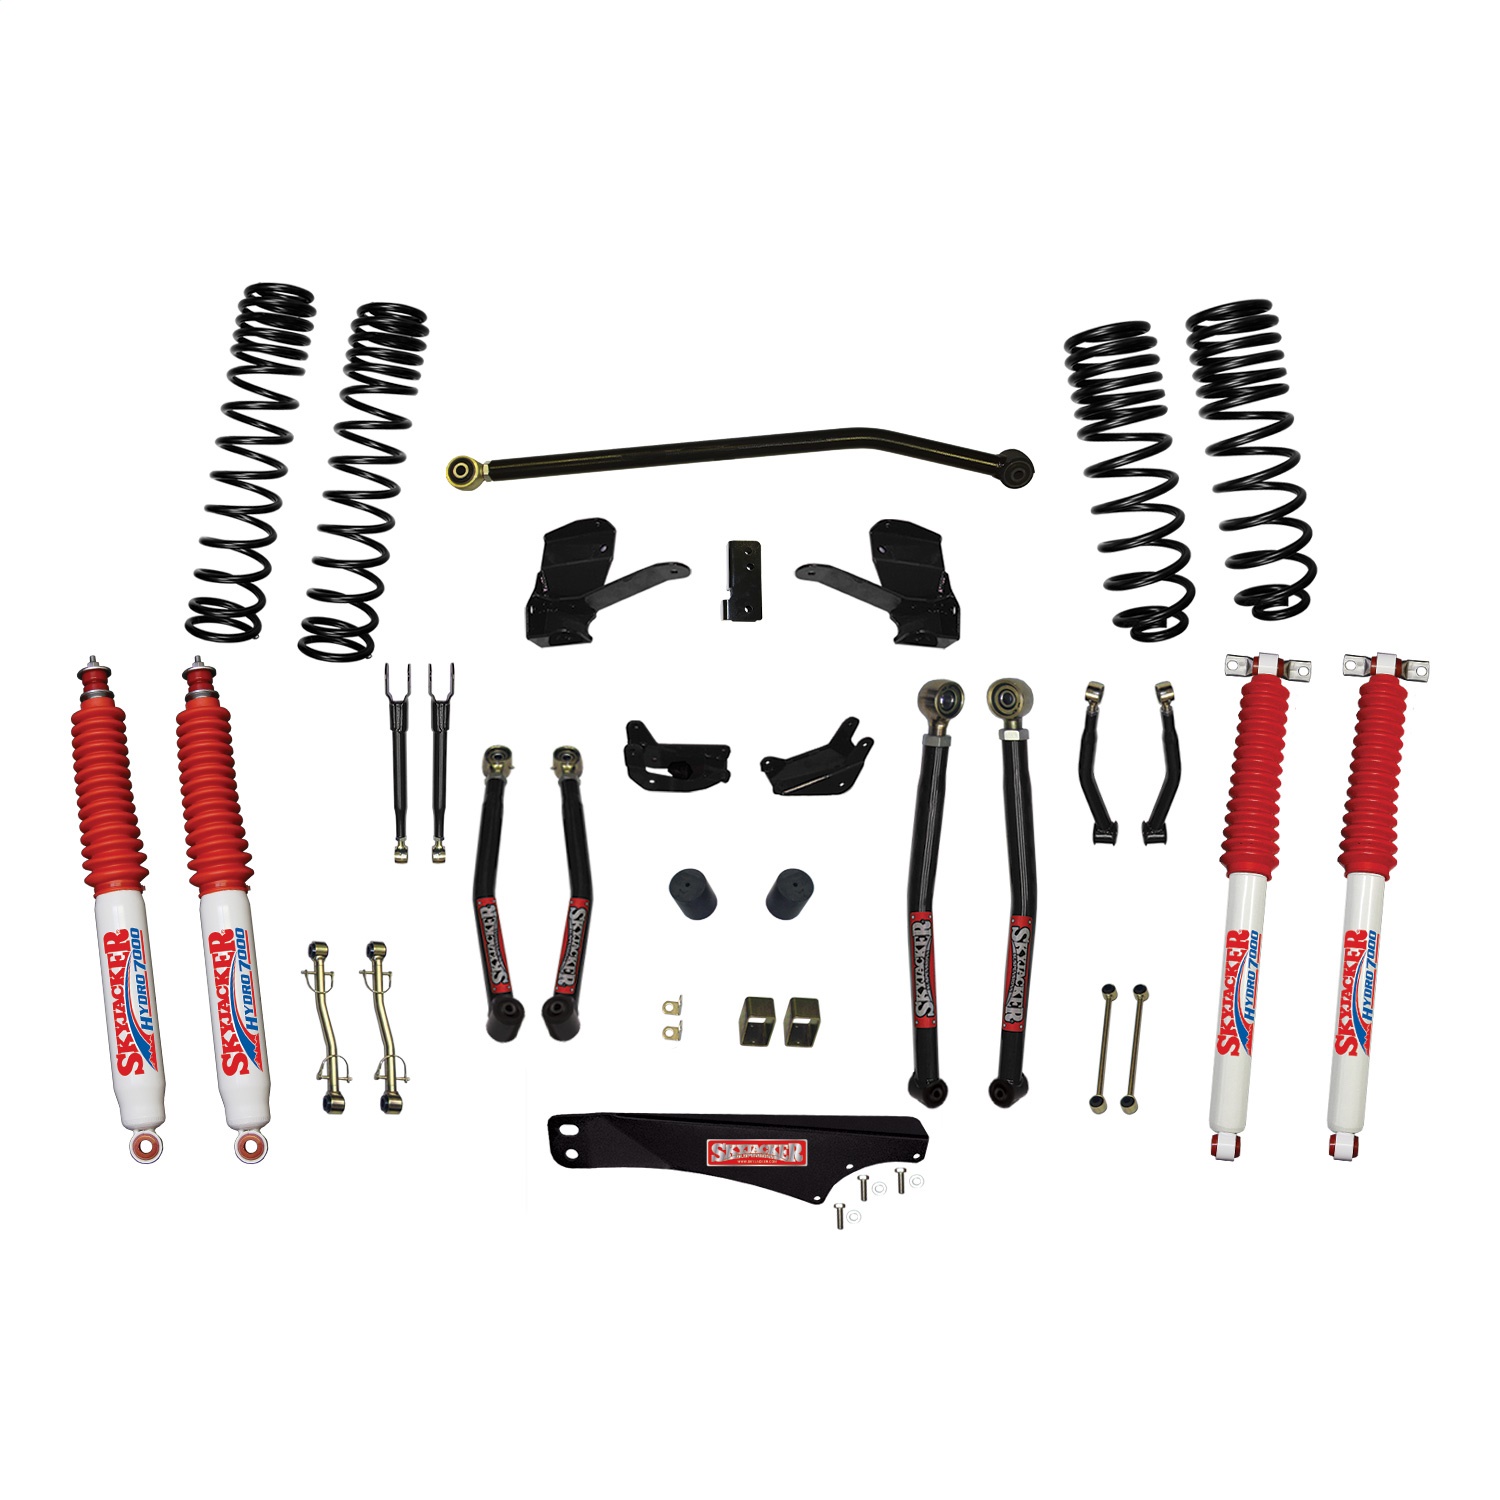 JK40LKLT-SXH Front and Rear Suspension Lift Kit, Lift Amount: 4 in. Front/4 in. Rear